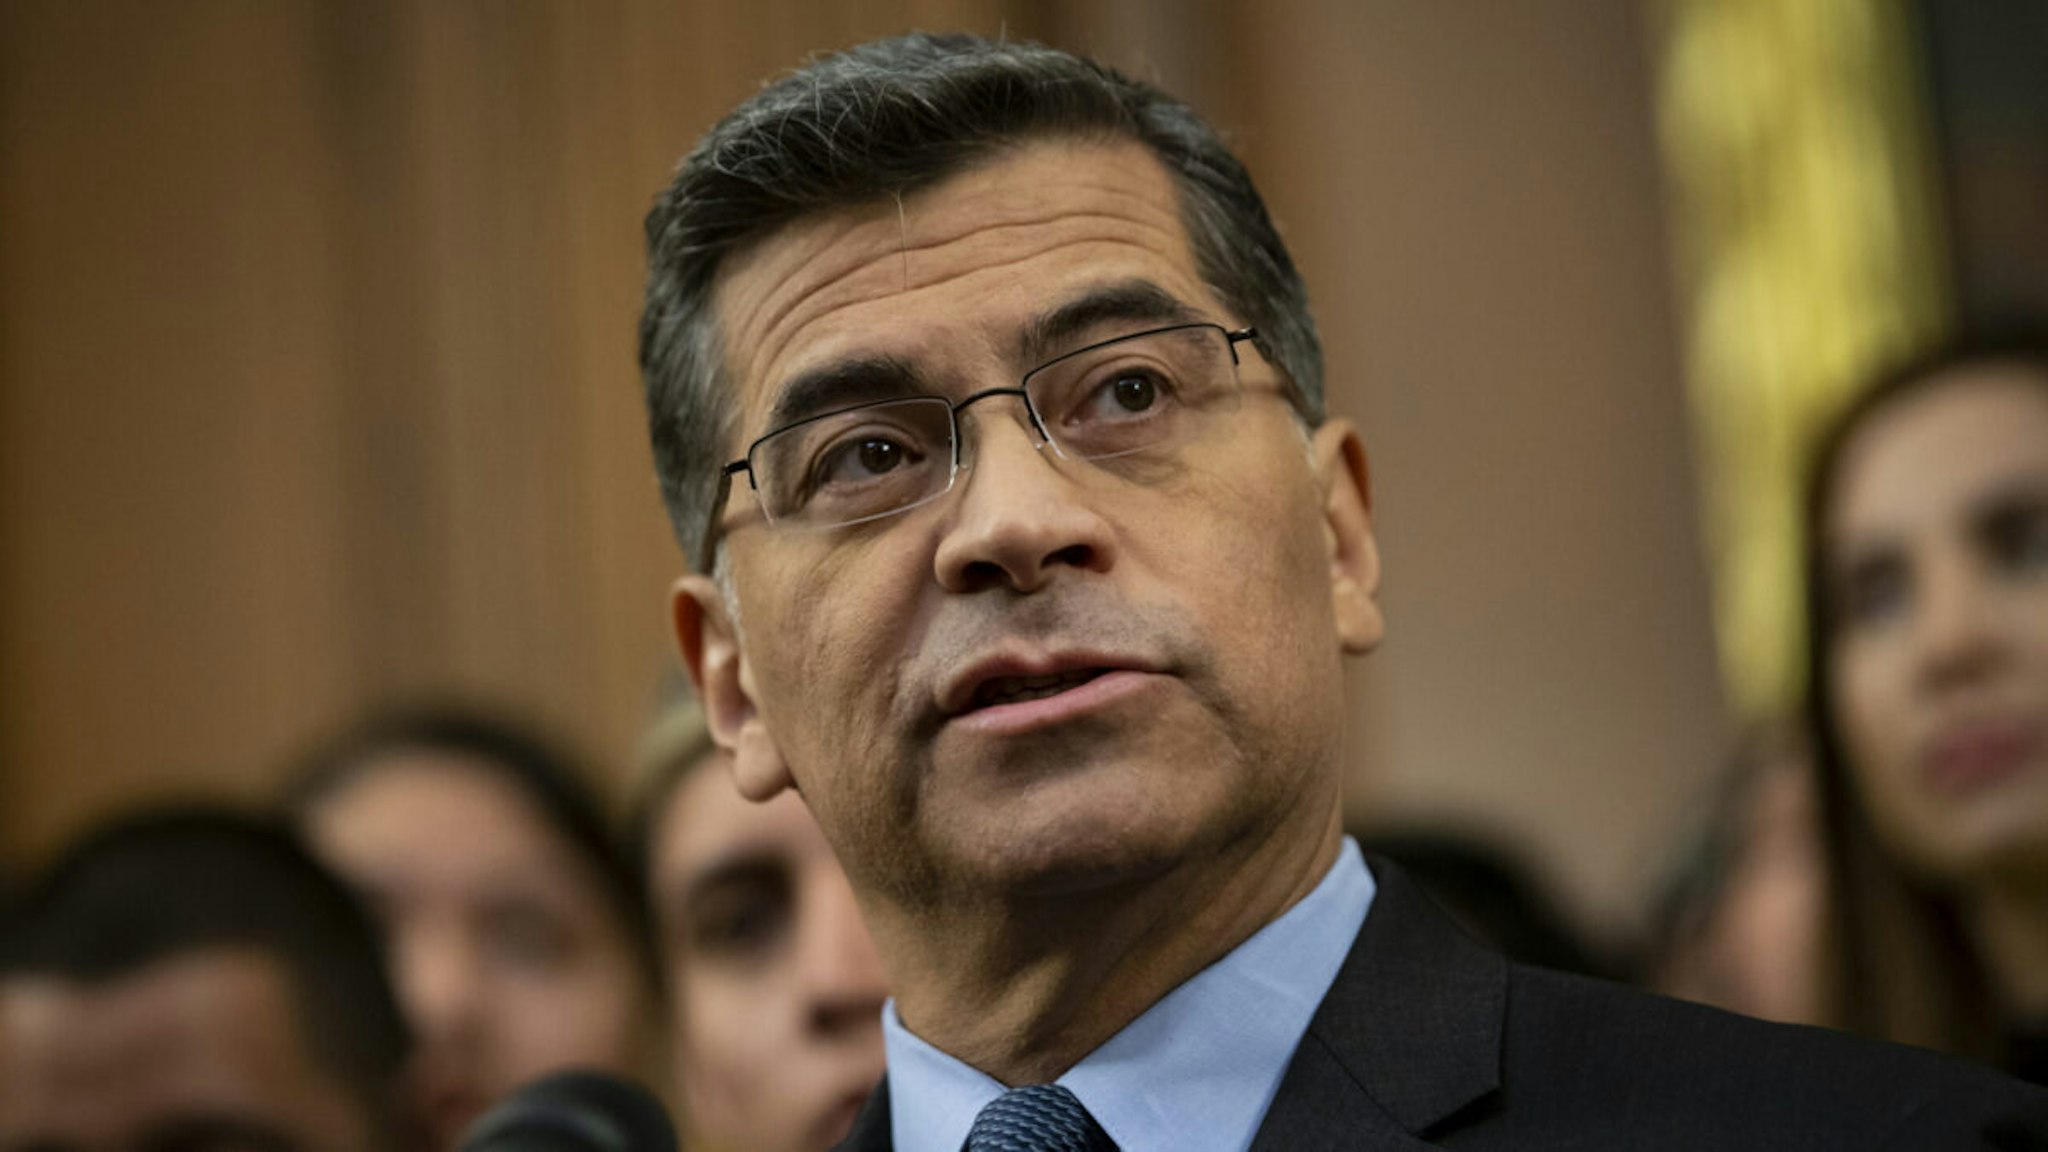 Xavier Becerra, California's attorney general, speaks during a news conference on Capitol Hill in Washington, D.C., U.S., on Tuesday, Nov. 12, 2019.